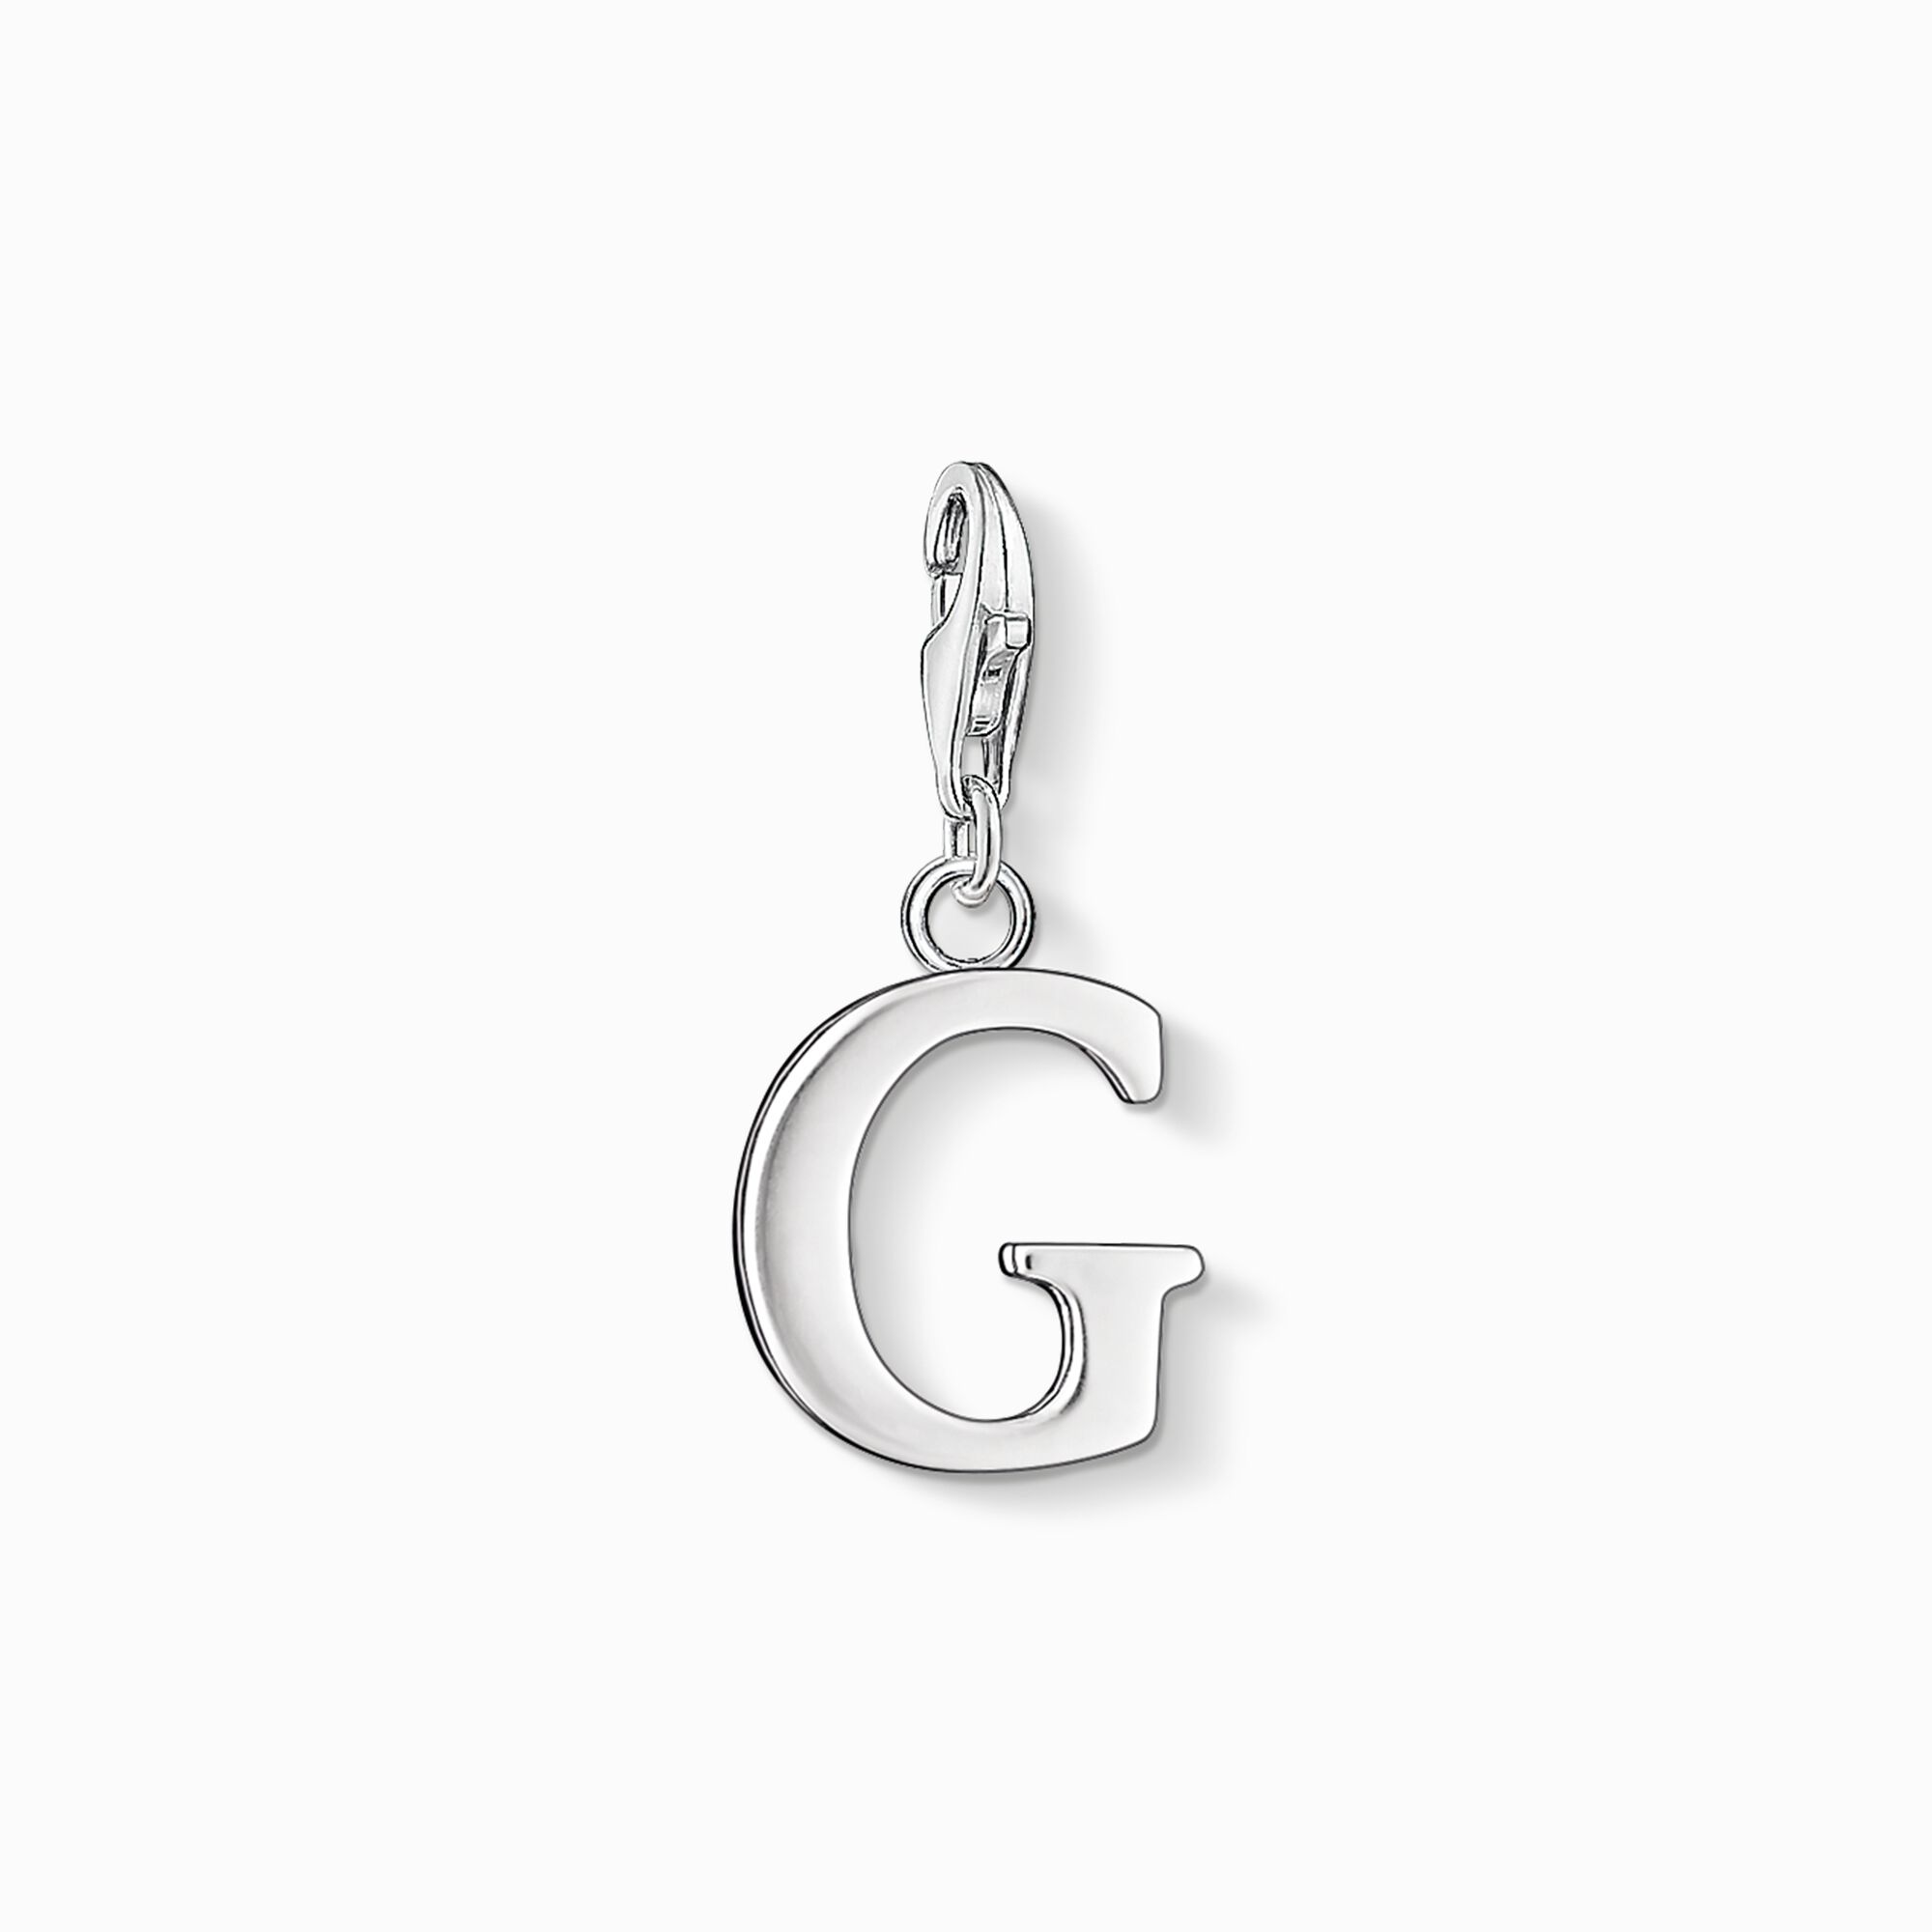 Charm pendant letter G from the Charm Club collection in the THOMAS SABO online store